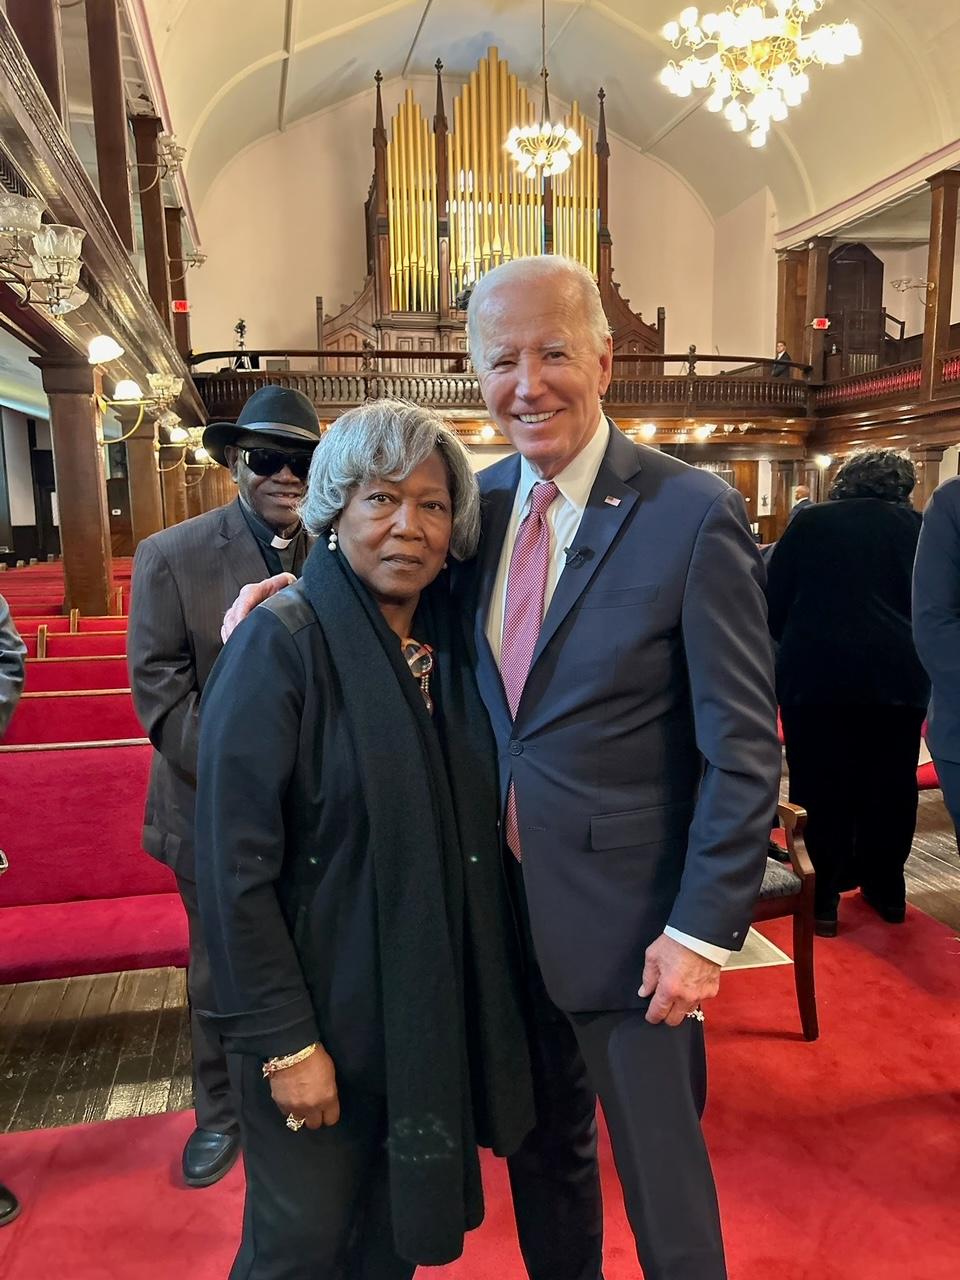 President Joe Biden pictured with Polly Sheppard at Mother Emanuel AME Church in Charleston, S.C., in an undated photo. (Courtesy Polly Sheppard)